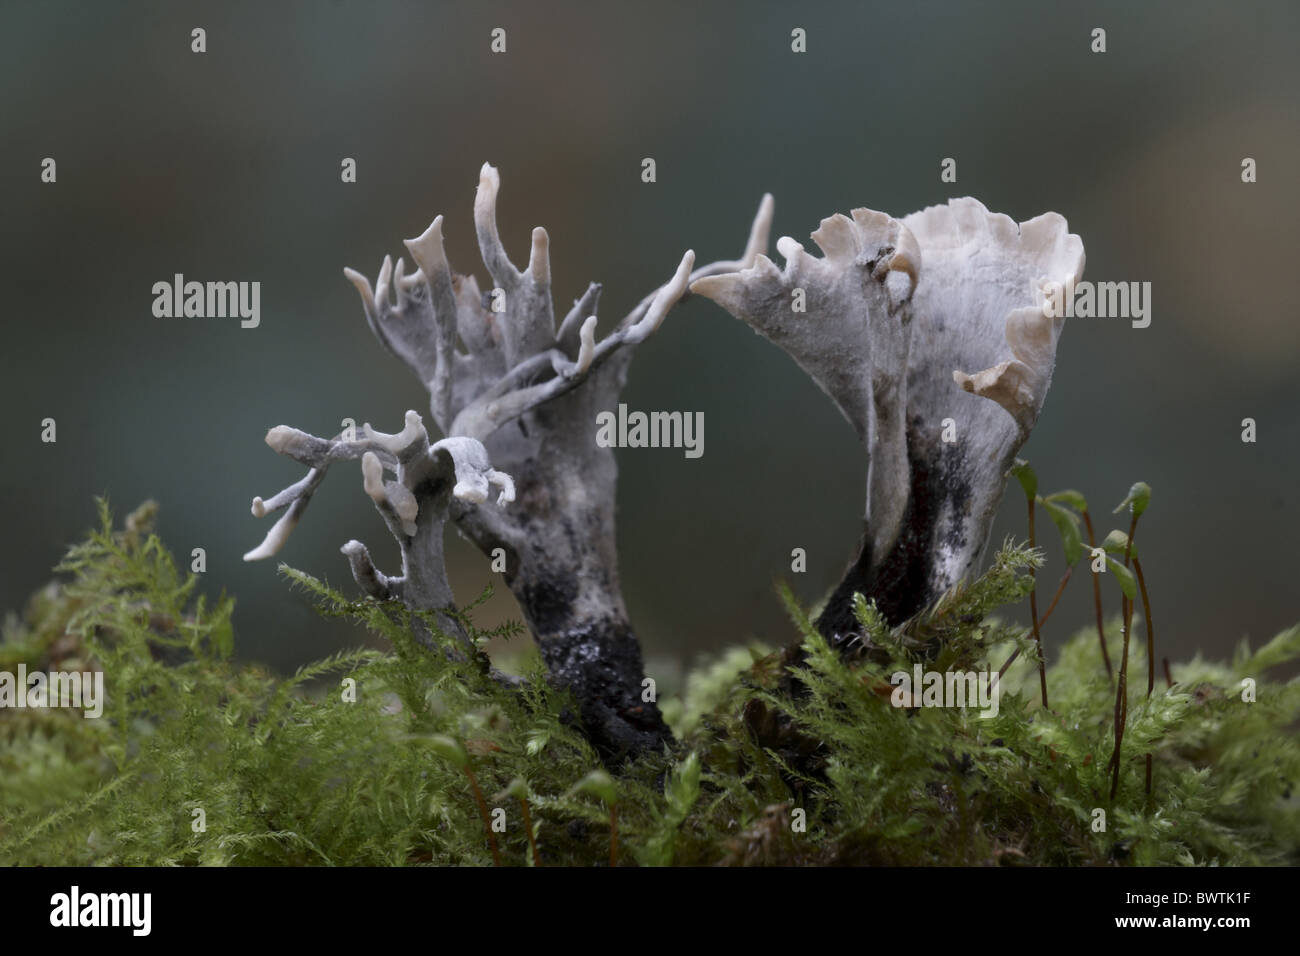 Candle-snuff Fungus (Xylaria hypoxylon) fruiting bodies, growing on tree stump amongst moss in woodland, Leicestershire, Stock Photo